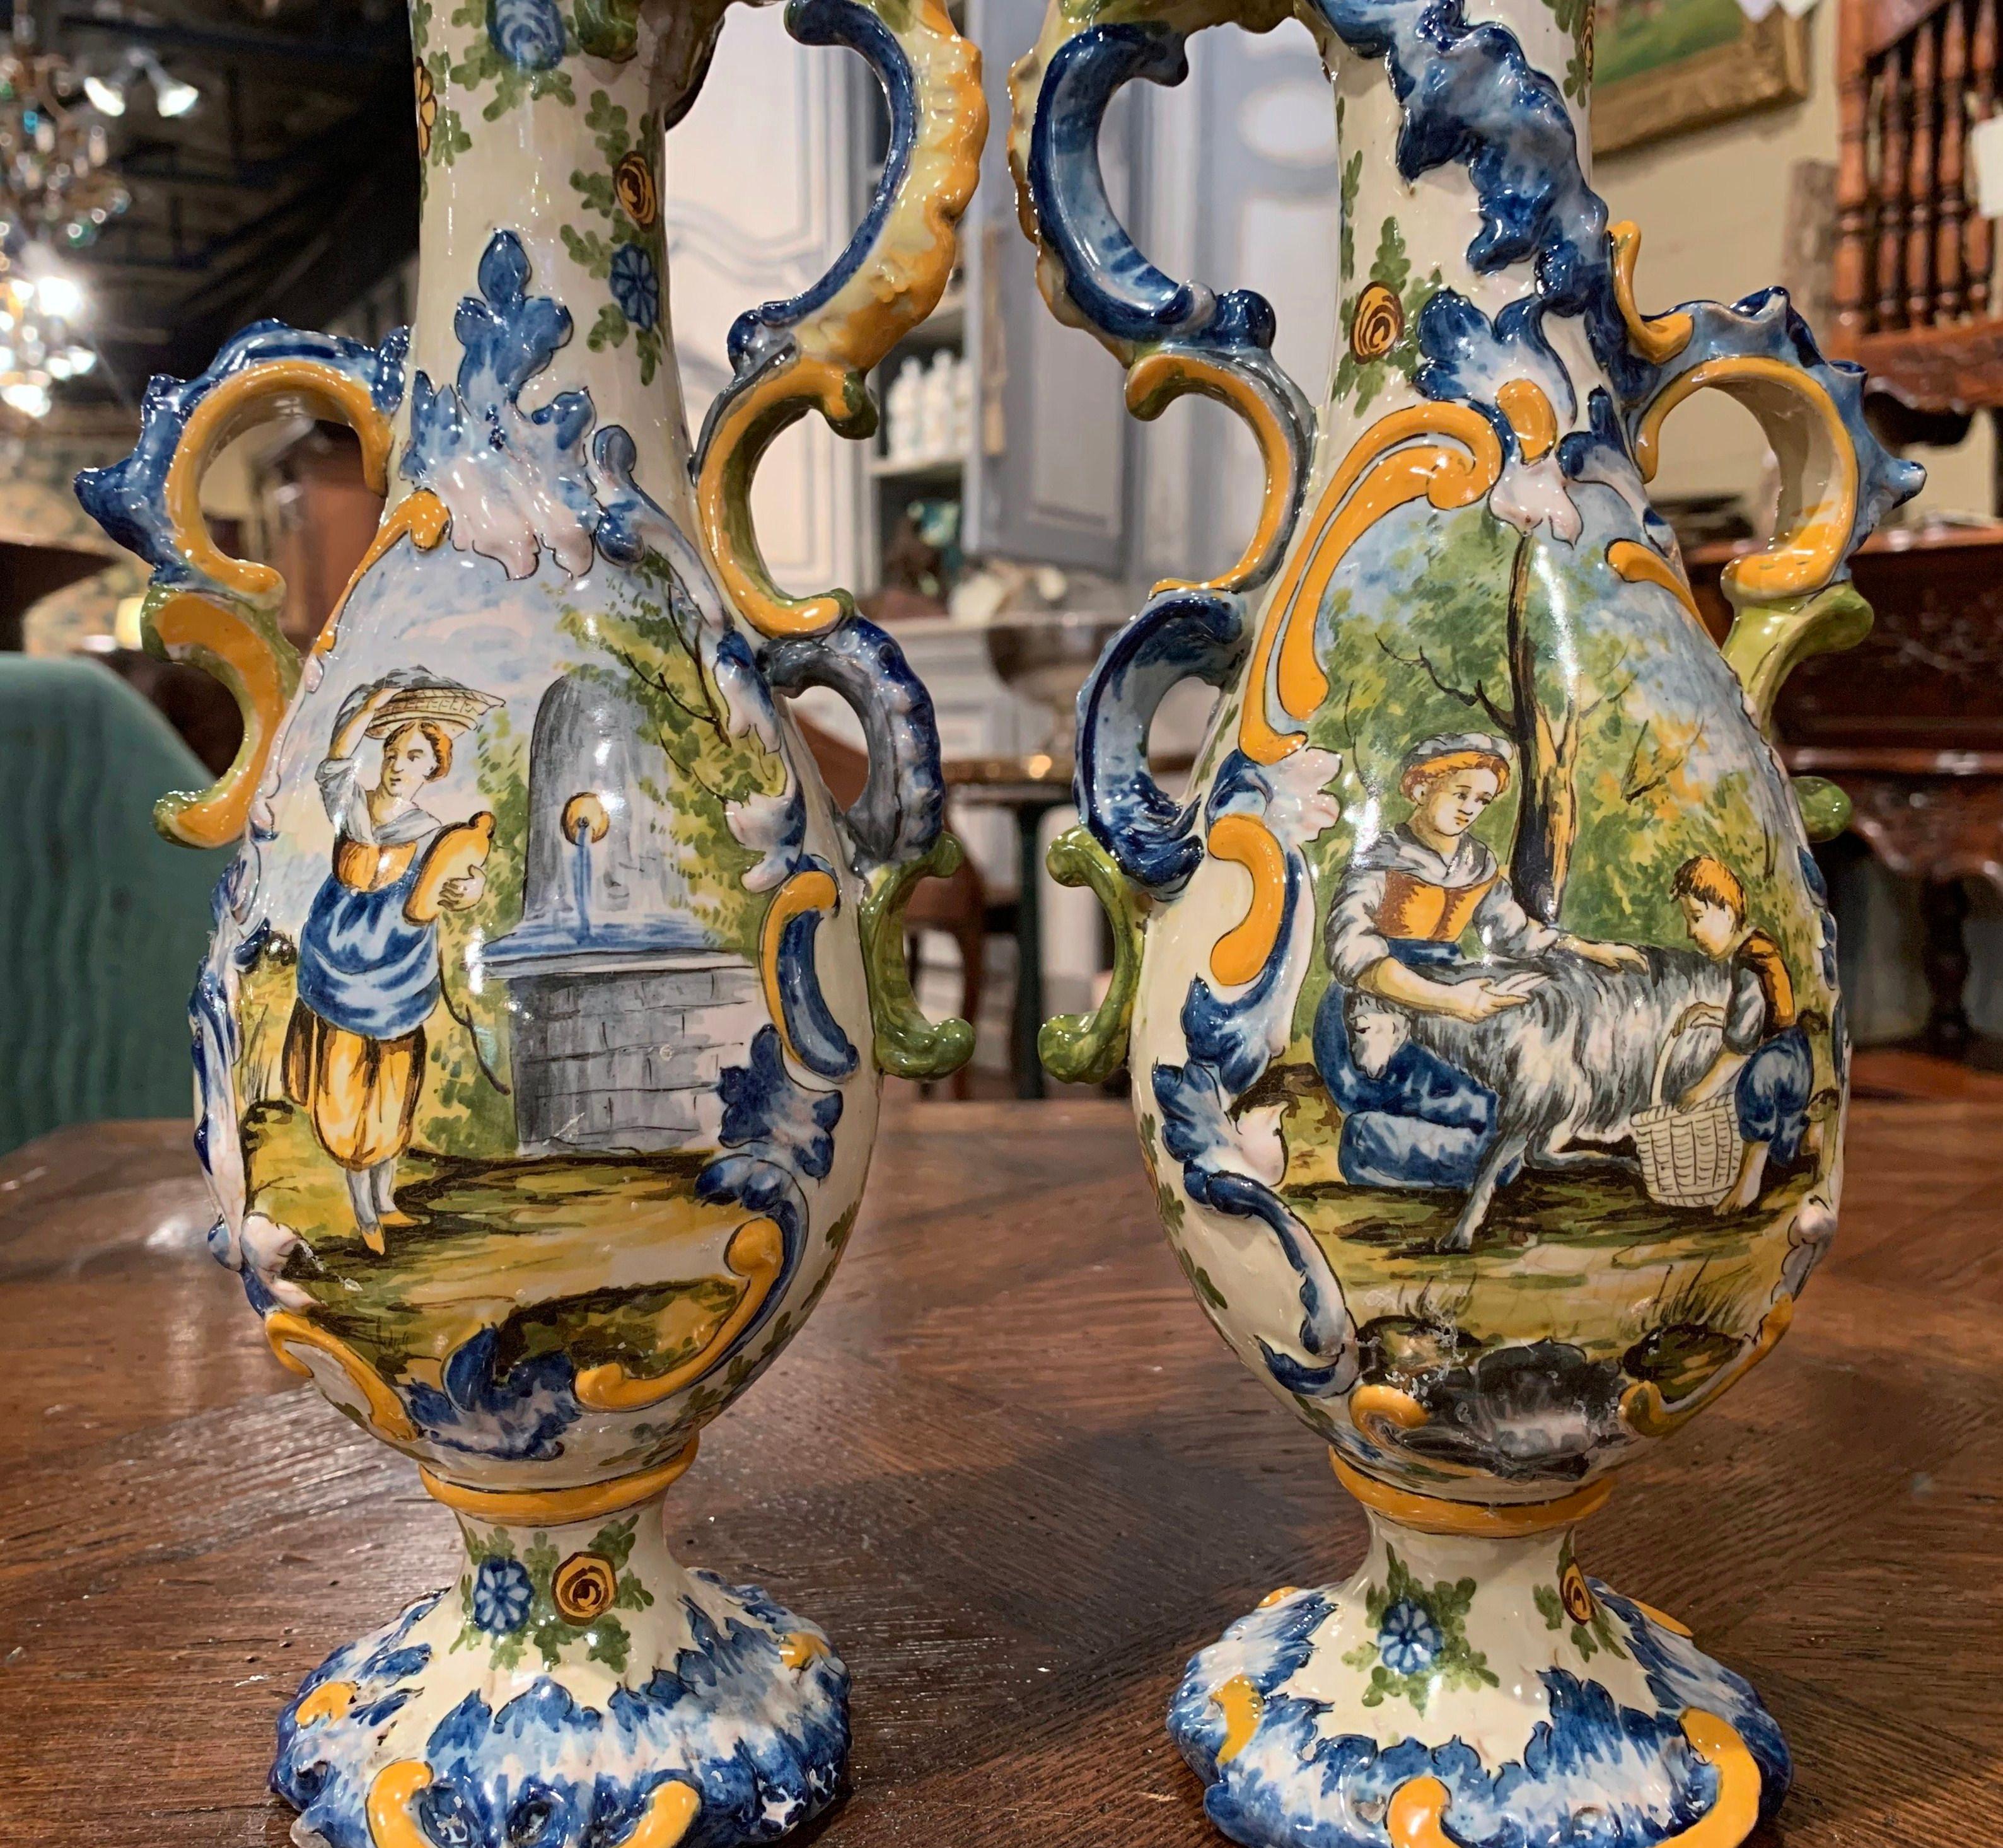 Make a statement on a mantel (fireplace) or enfilade with this pair of sculptural, antique urns. Sculpted in Italy circa 1890, the artful, ceramic vases have a unique, asymmetrical shape and detailed illustrations. Crafted from porcelain, each